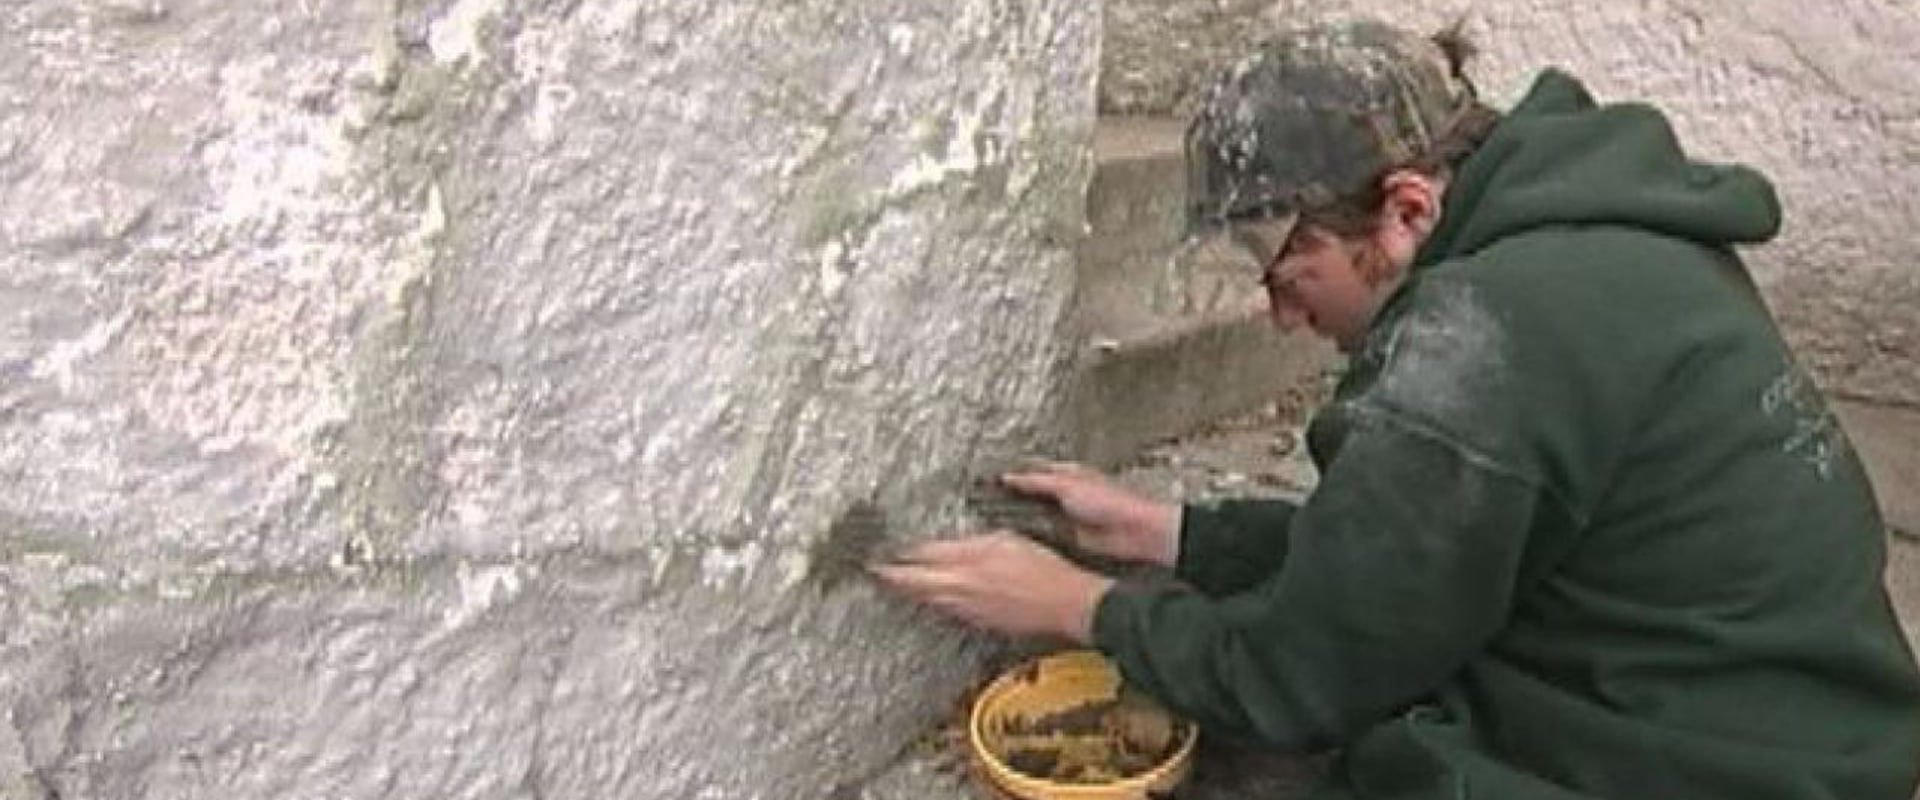 How to Repair a Concrete Wall Effectively